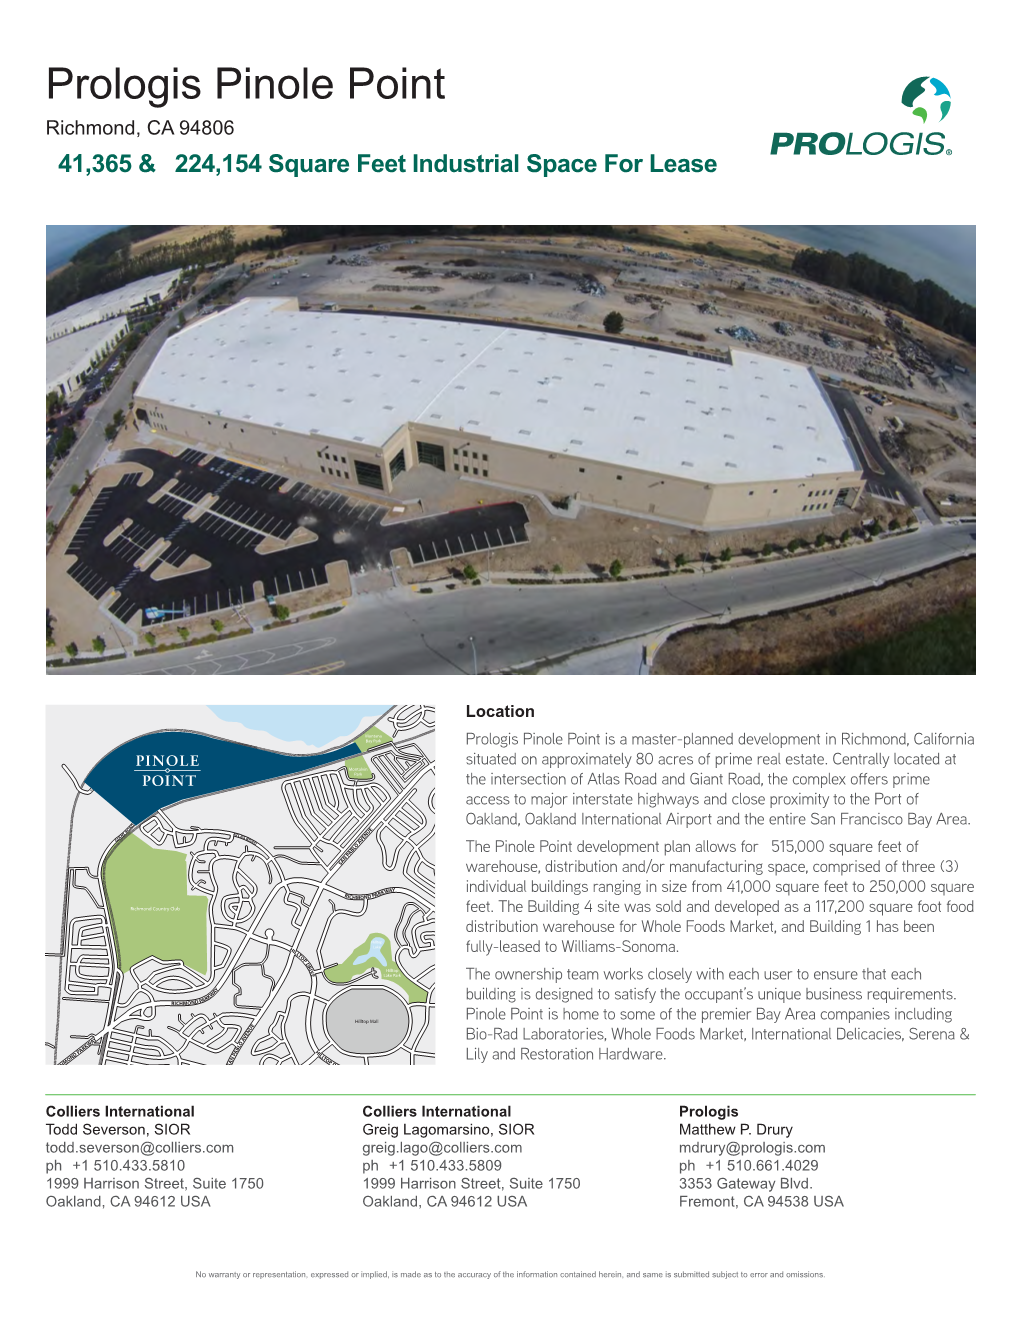 Prologis Pinole Point Richmond, CA 94806 ±41,365 & ±224,154 Square Feet Industrial Space for Lease